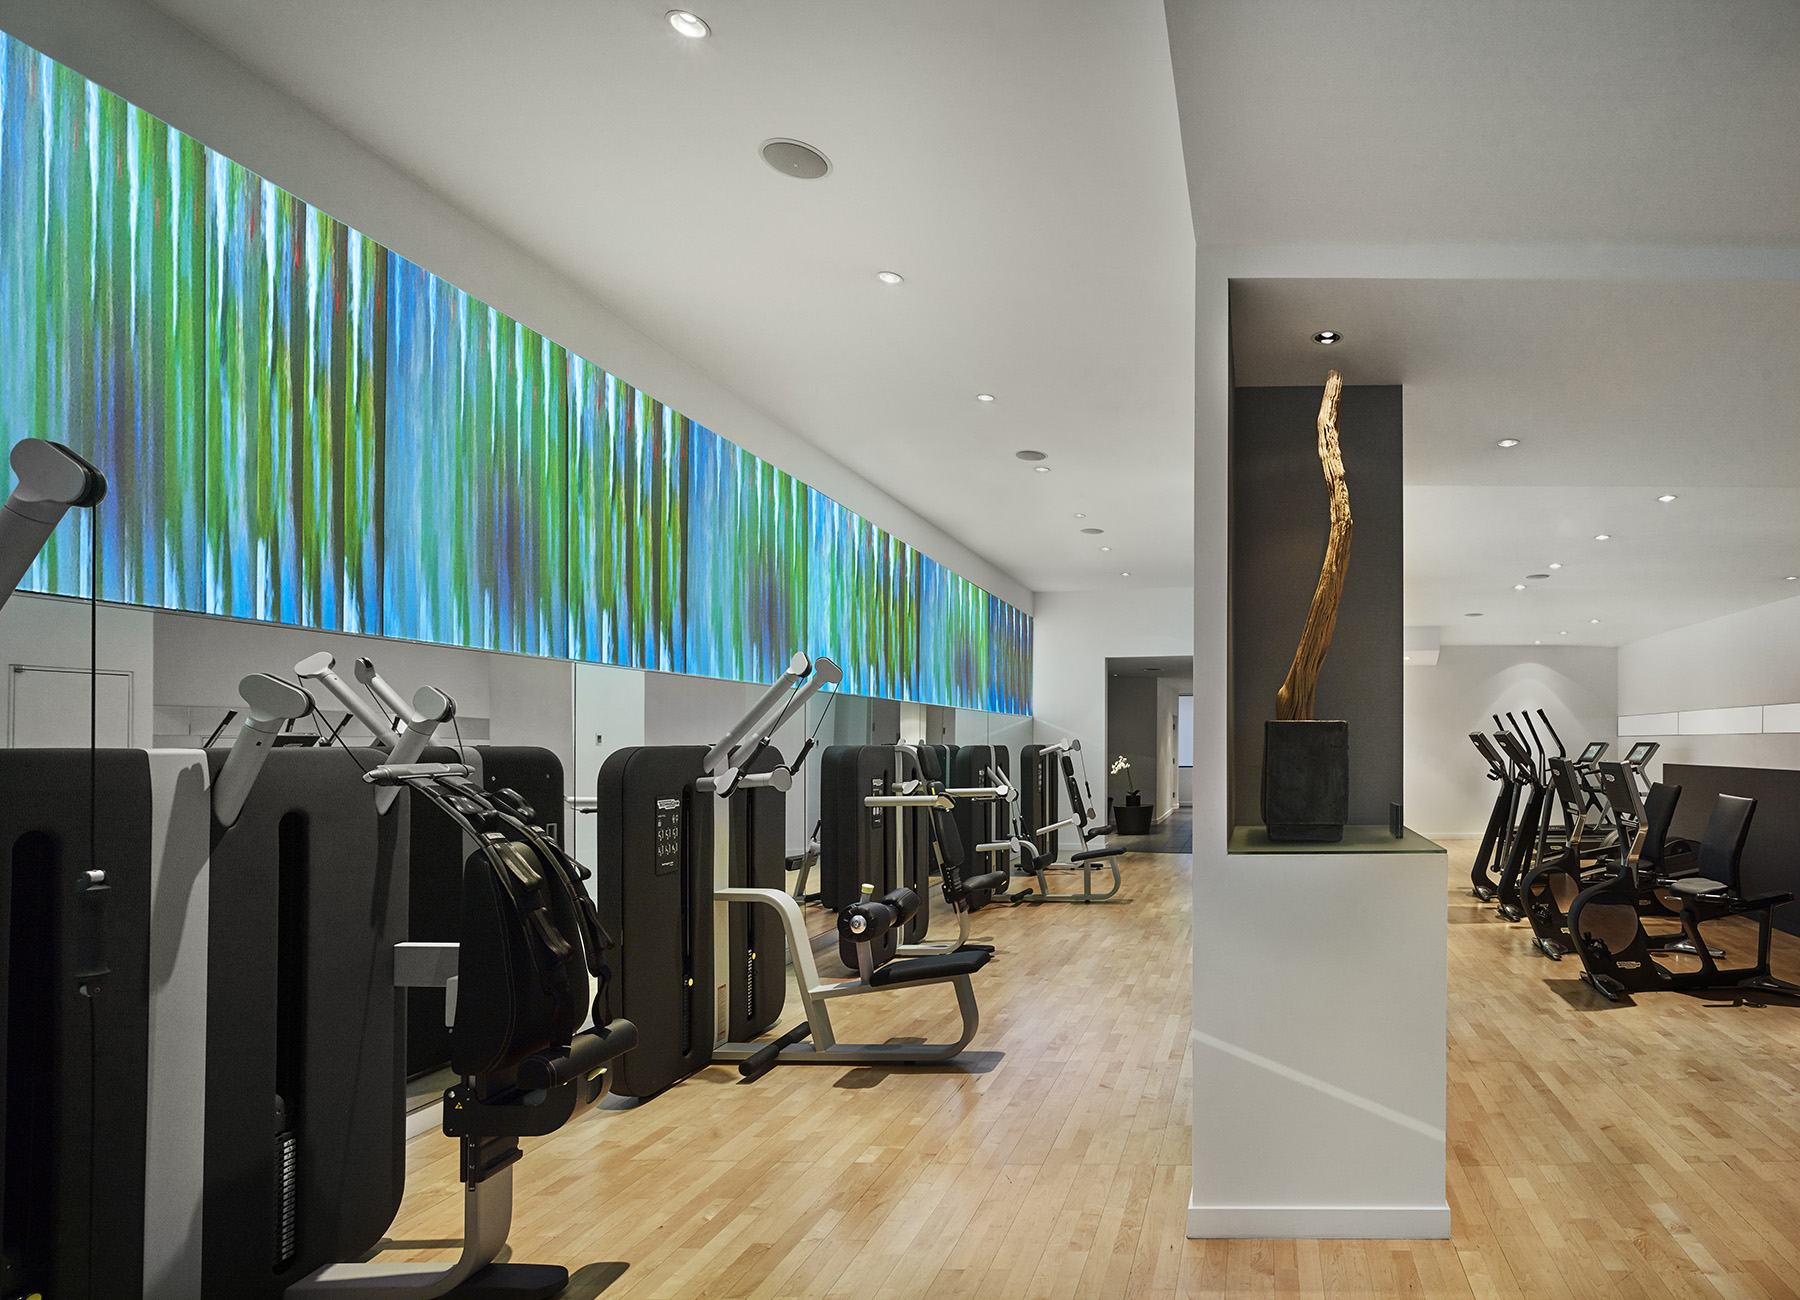 AKA Central Park fitness center/gym with artwork and state-of-the-art cardio equipment